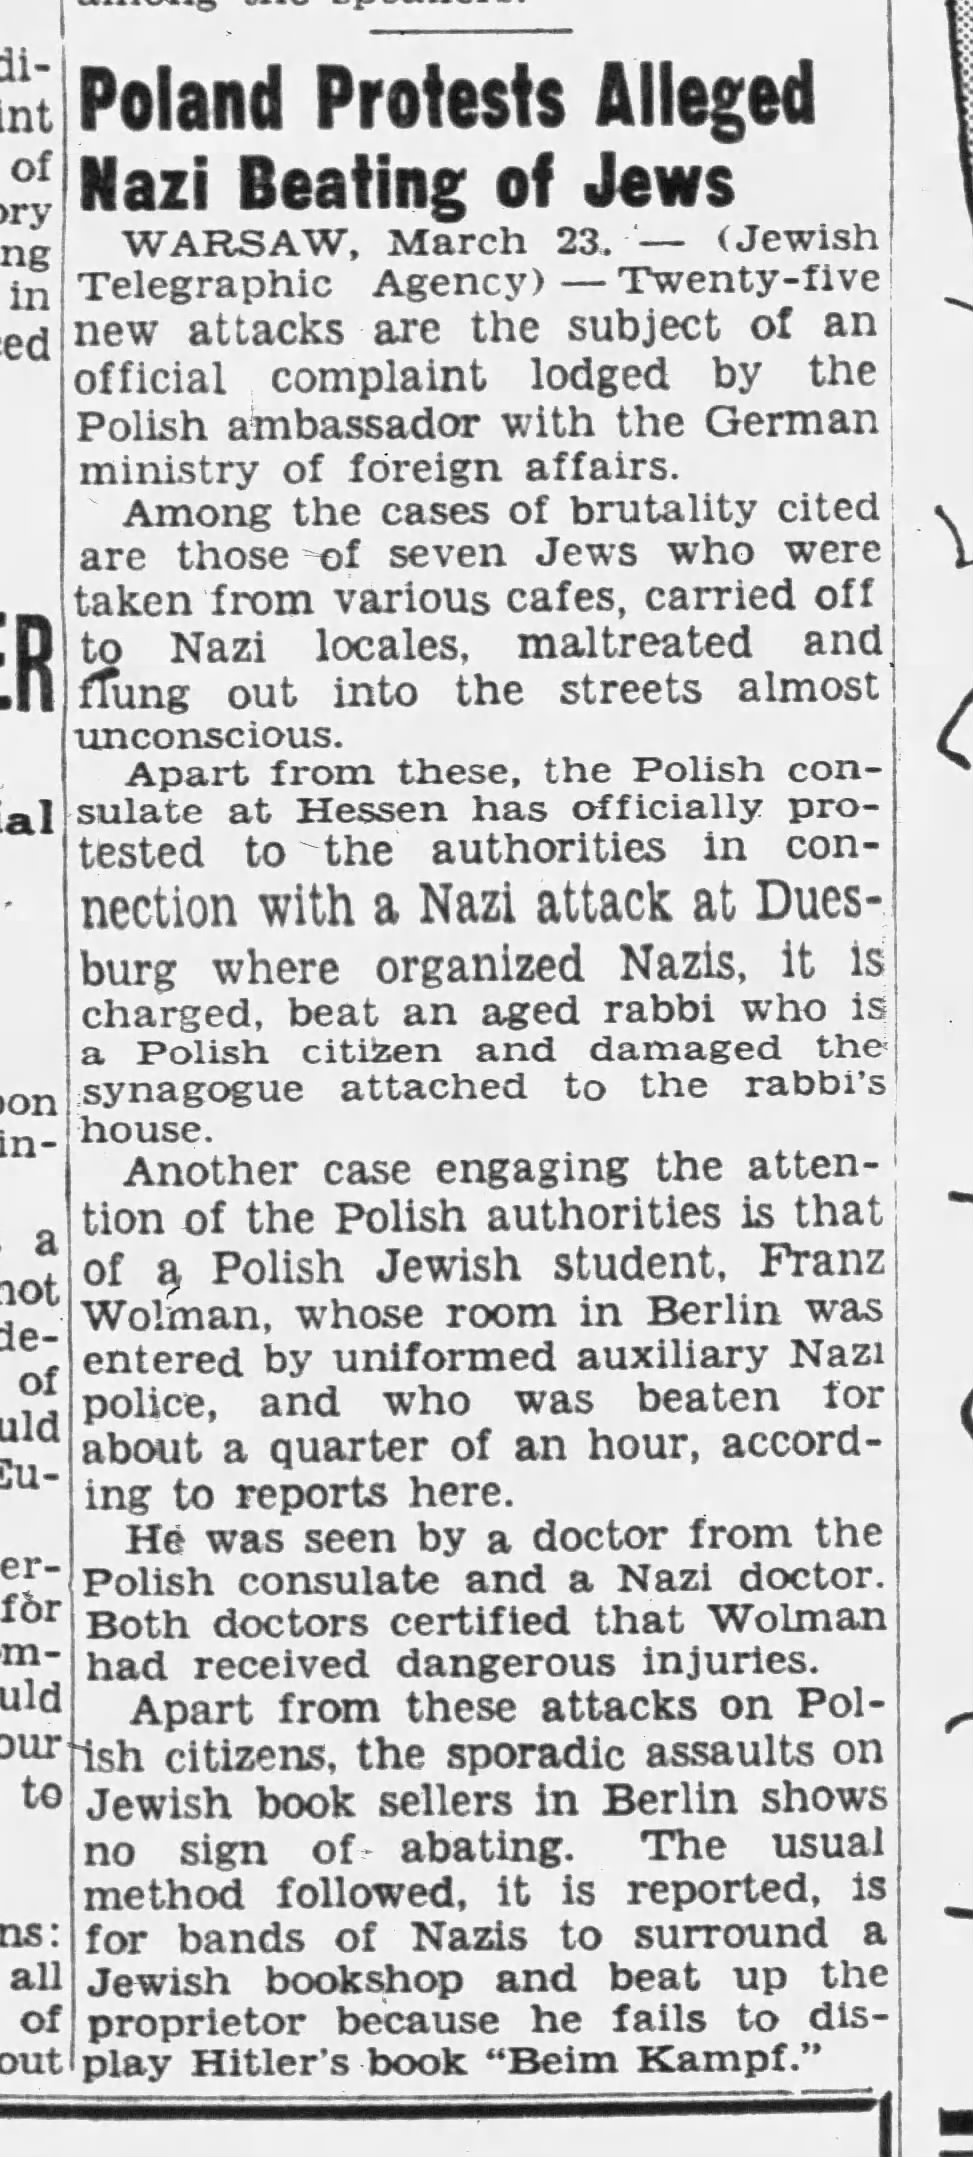 Poland Protests Alleged Nazi Beating of Jews